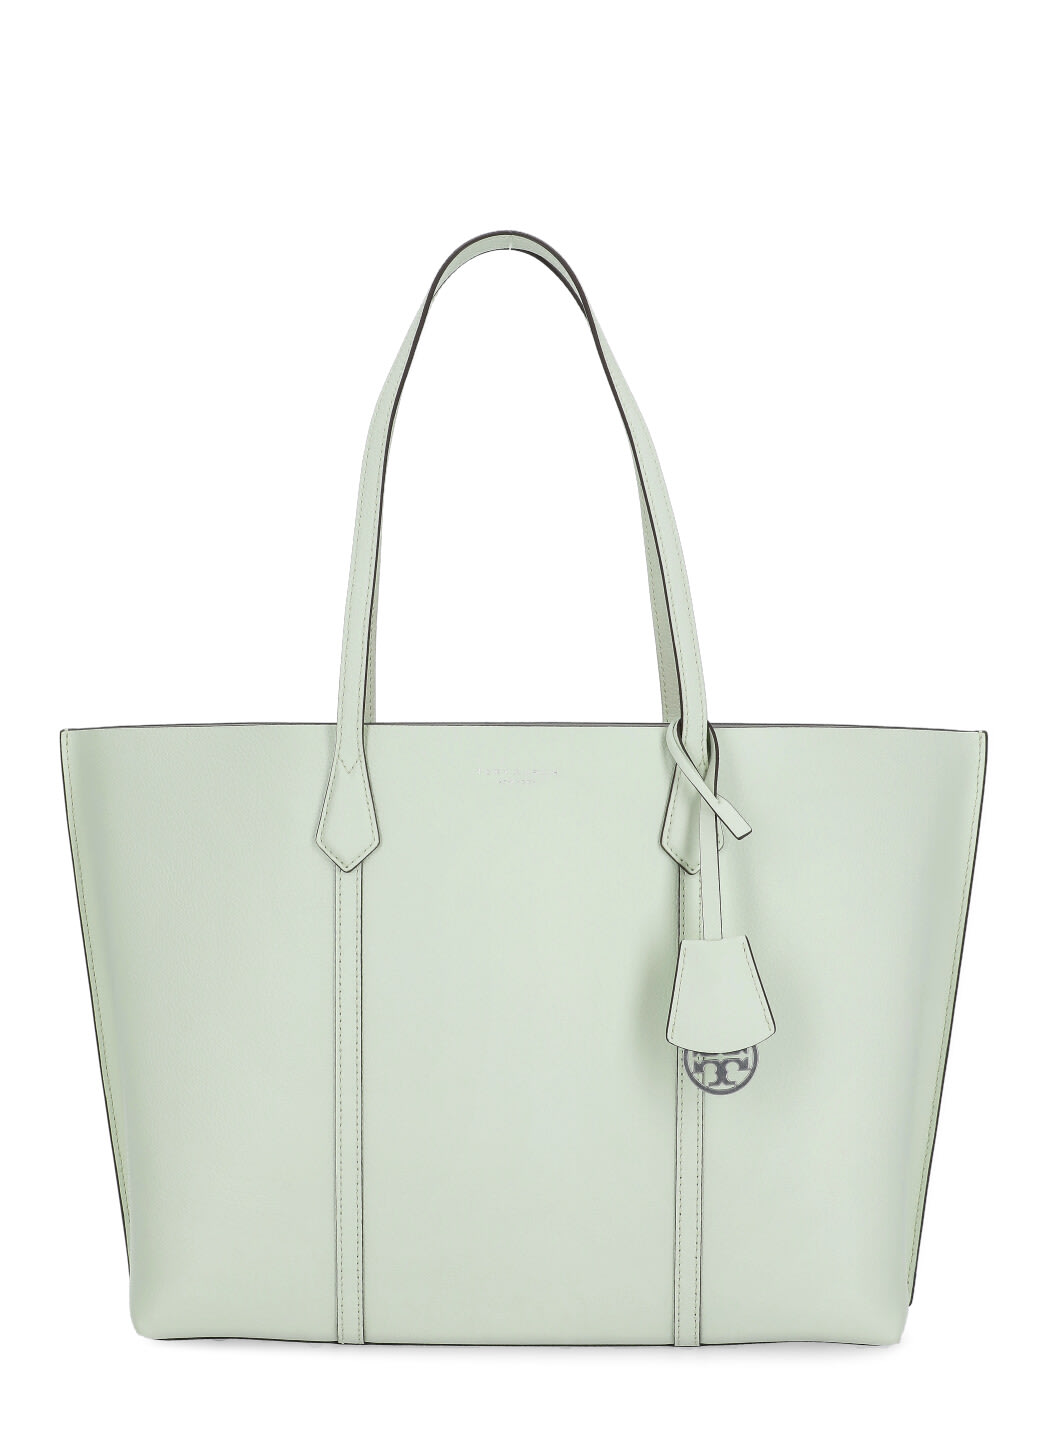 Tory Burch Women's Perry Triple-Compartment Tote